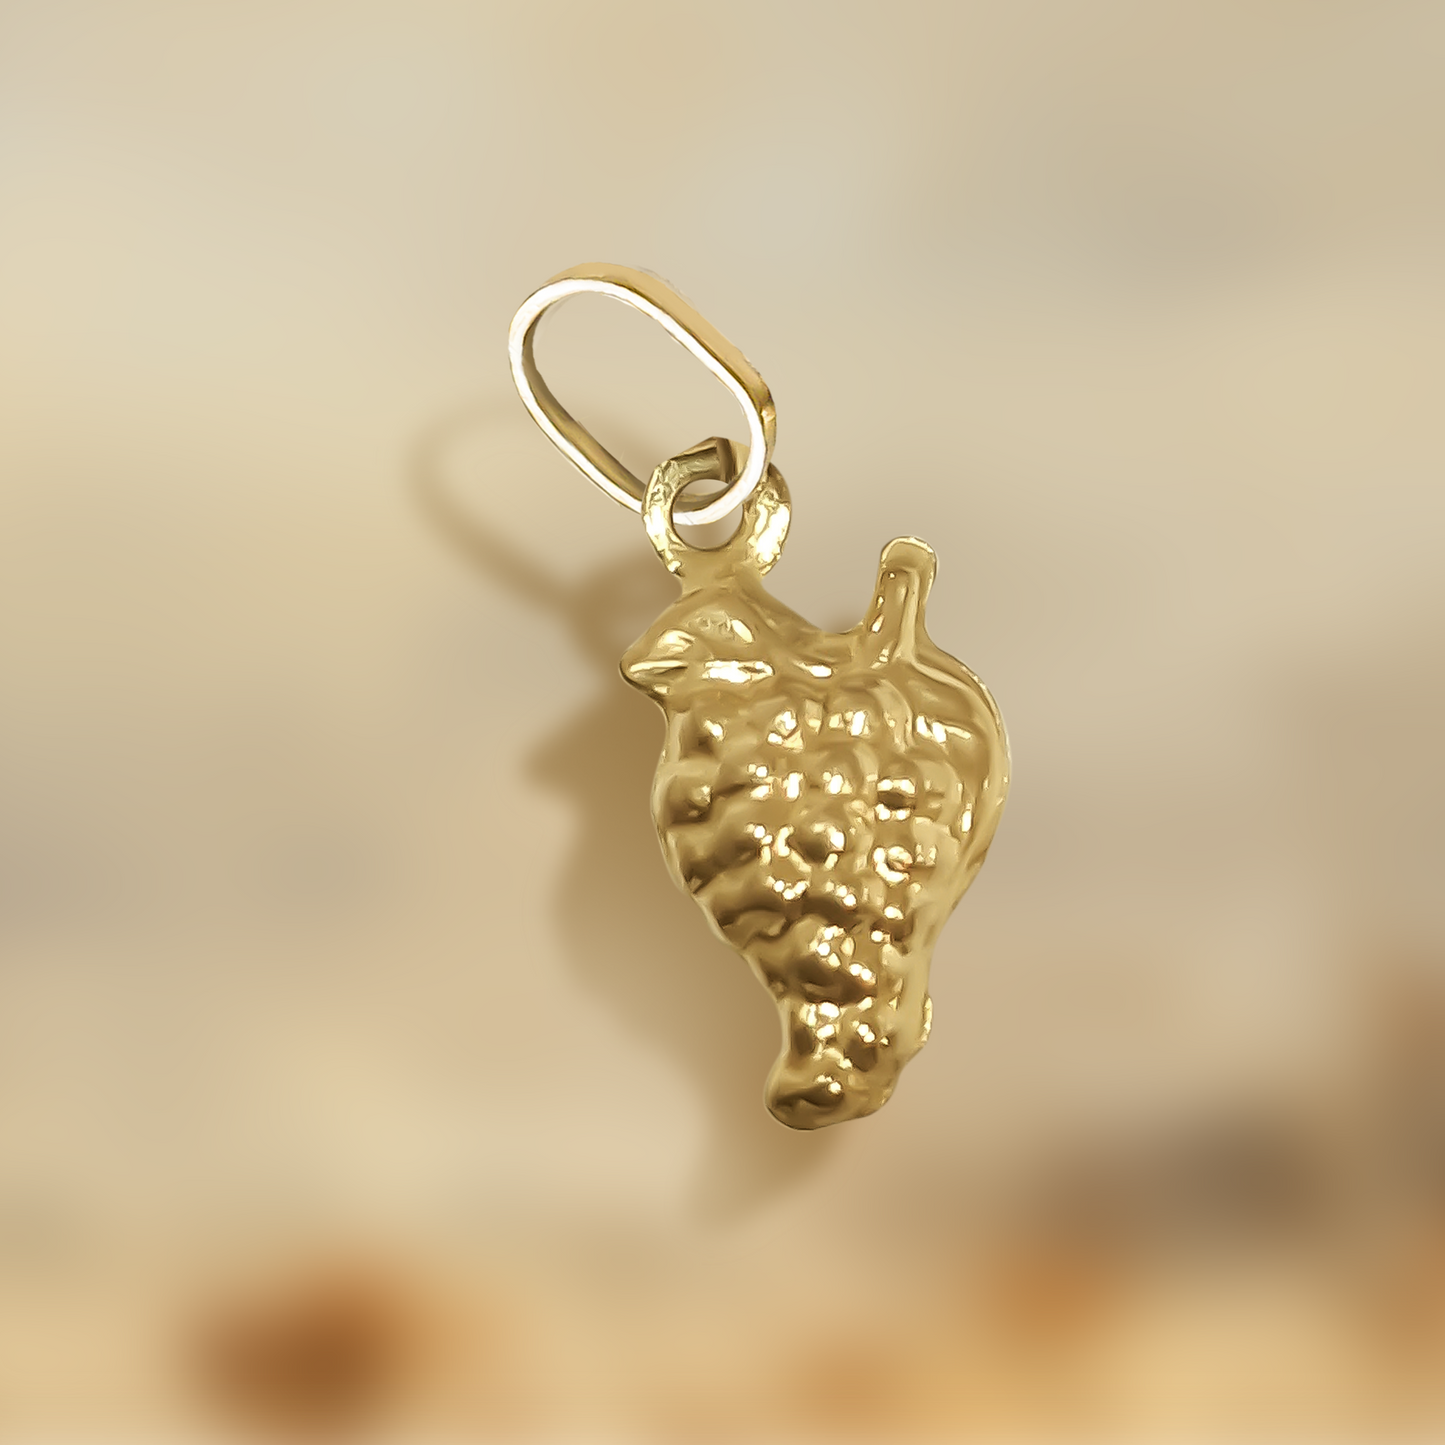 14mm Grapes Charm 9ct Yellow Gold